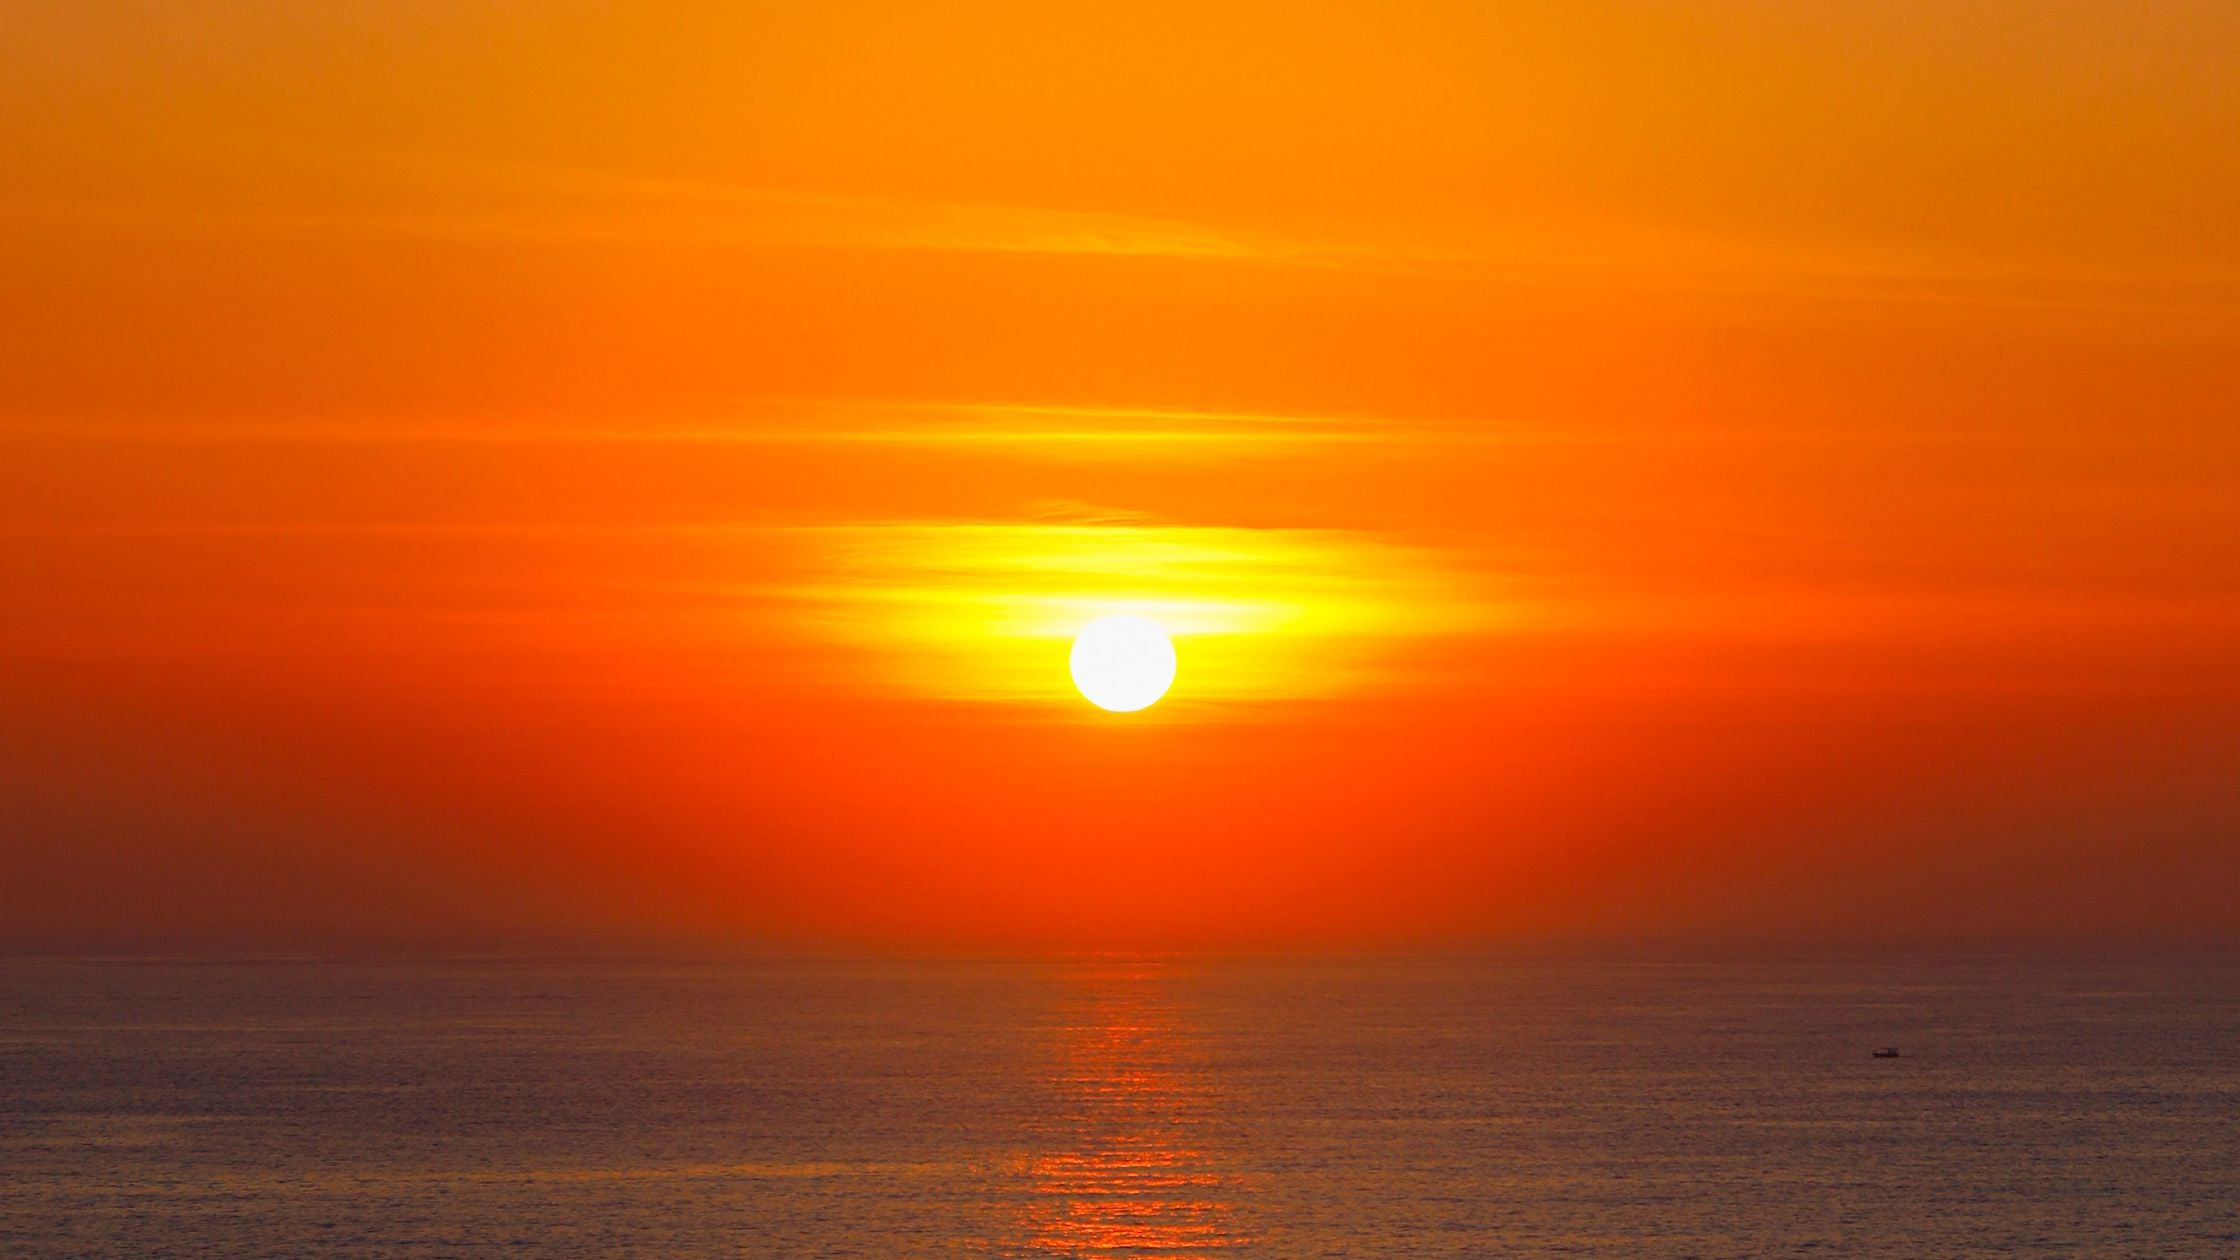 Orange Sunset Over the Ocean | The Cycle | BuDhaBrief by Jessica Jesse | BuDhaGirl